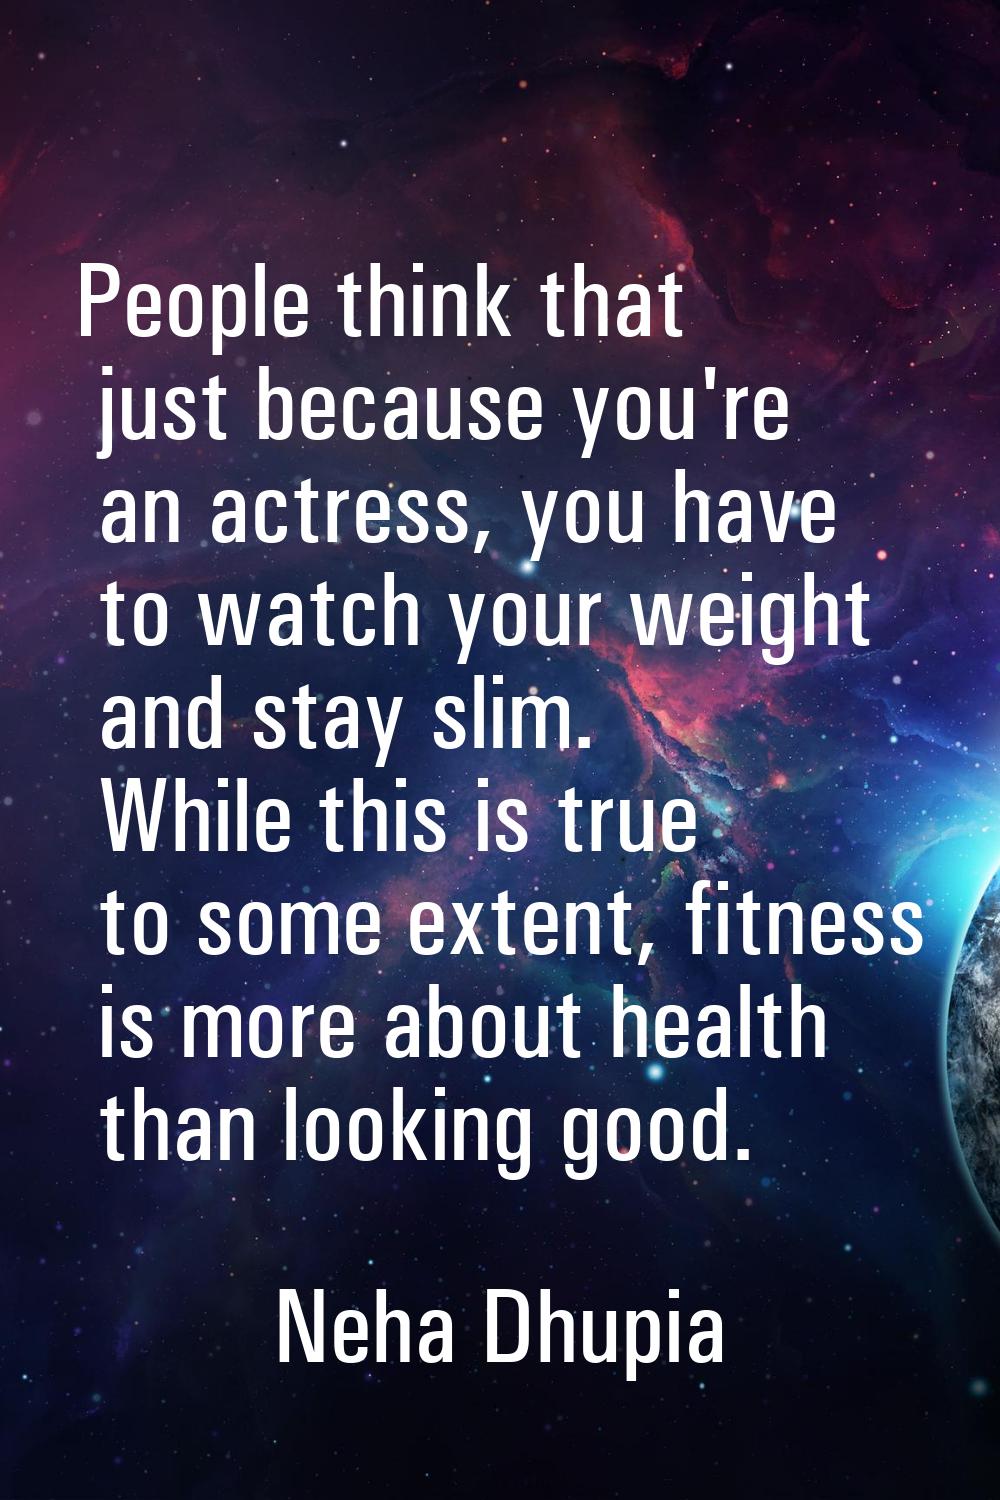 People think that just because you're an actress, you have to watch your weight and stay slim. Whil